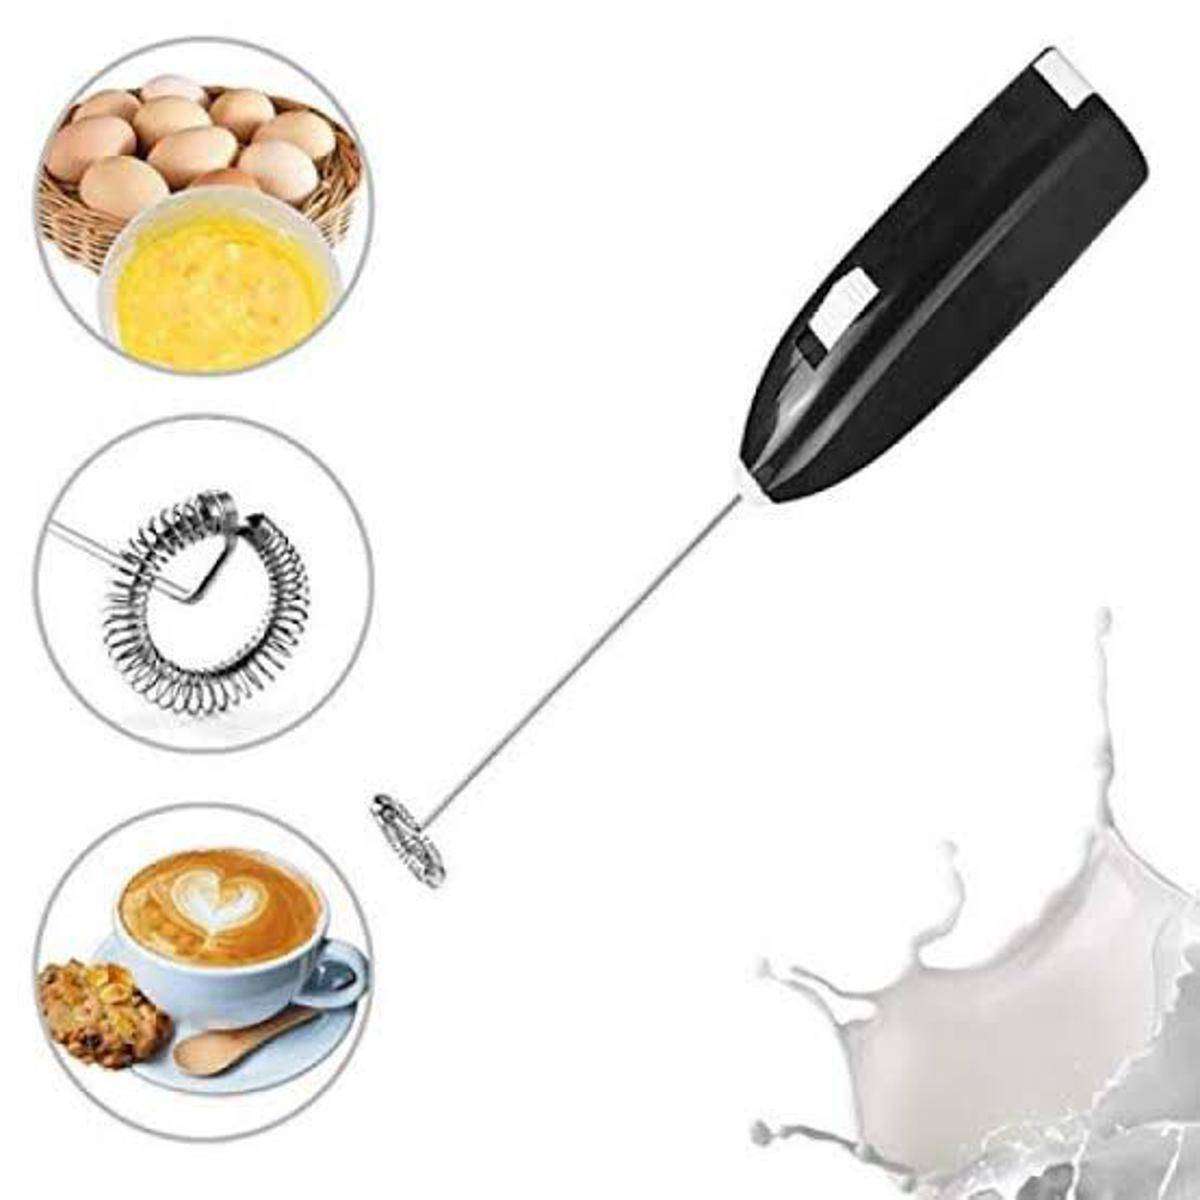 Lilyme Egg Beater Hand-held Electric Milk Beater Goat Milk Coffee